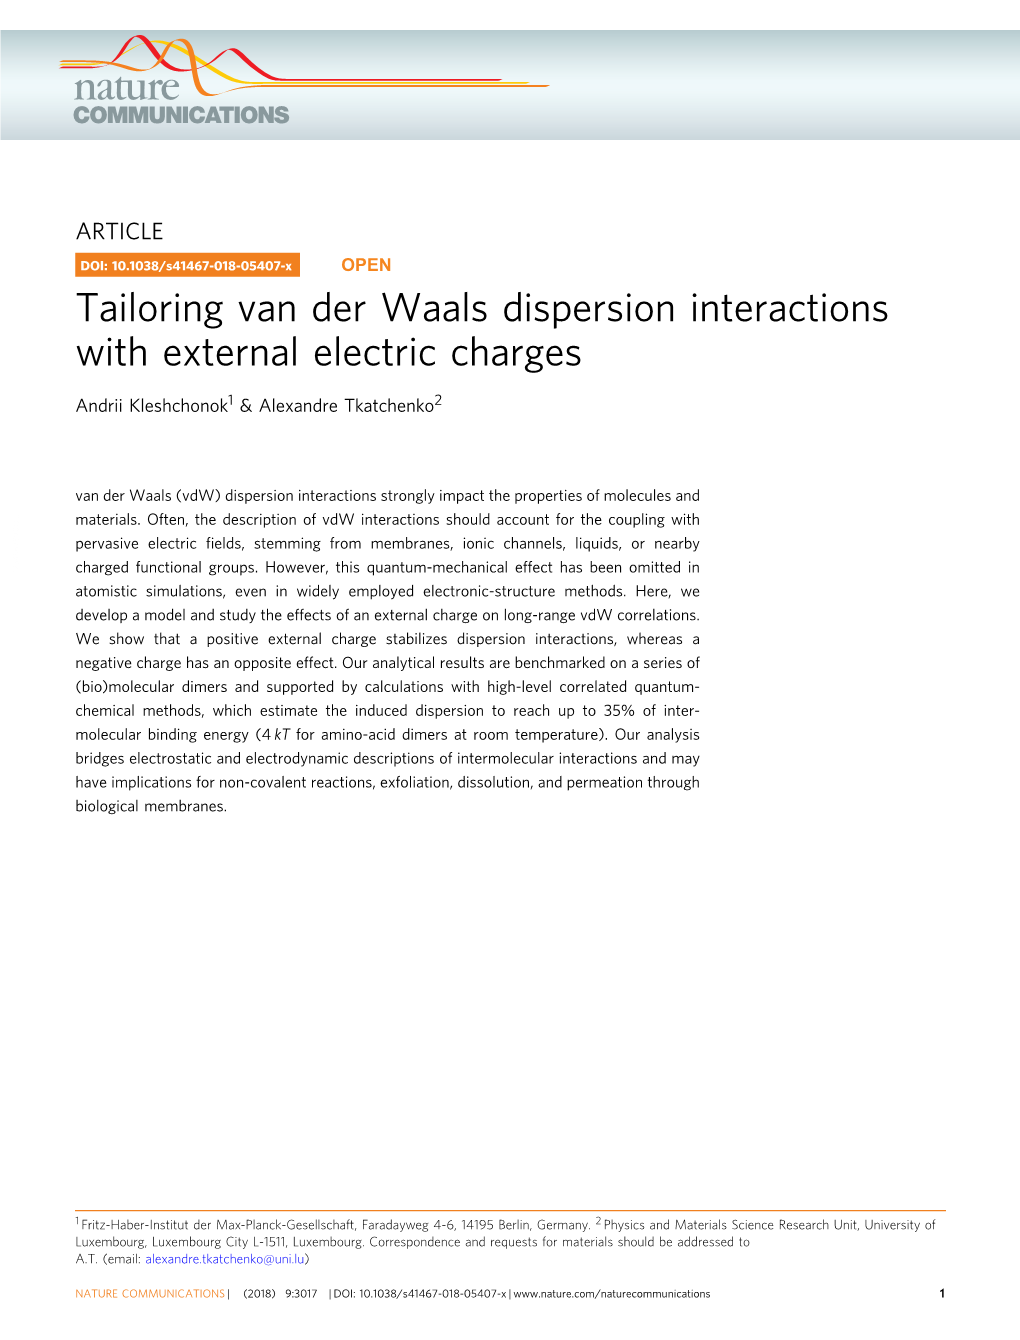 Tailoring Van Der Waals Dispersion Interactions with External Electric Charges